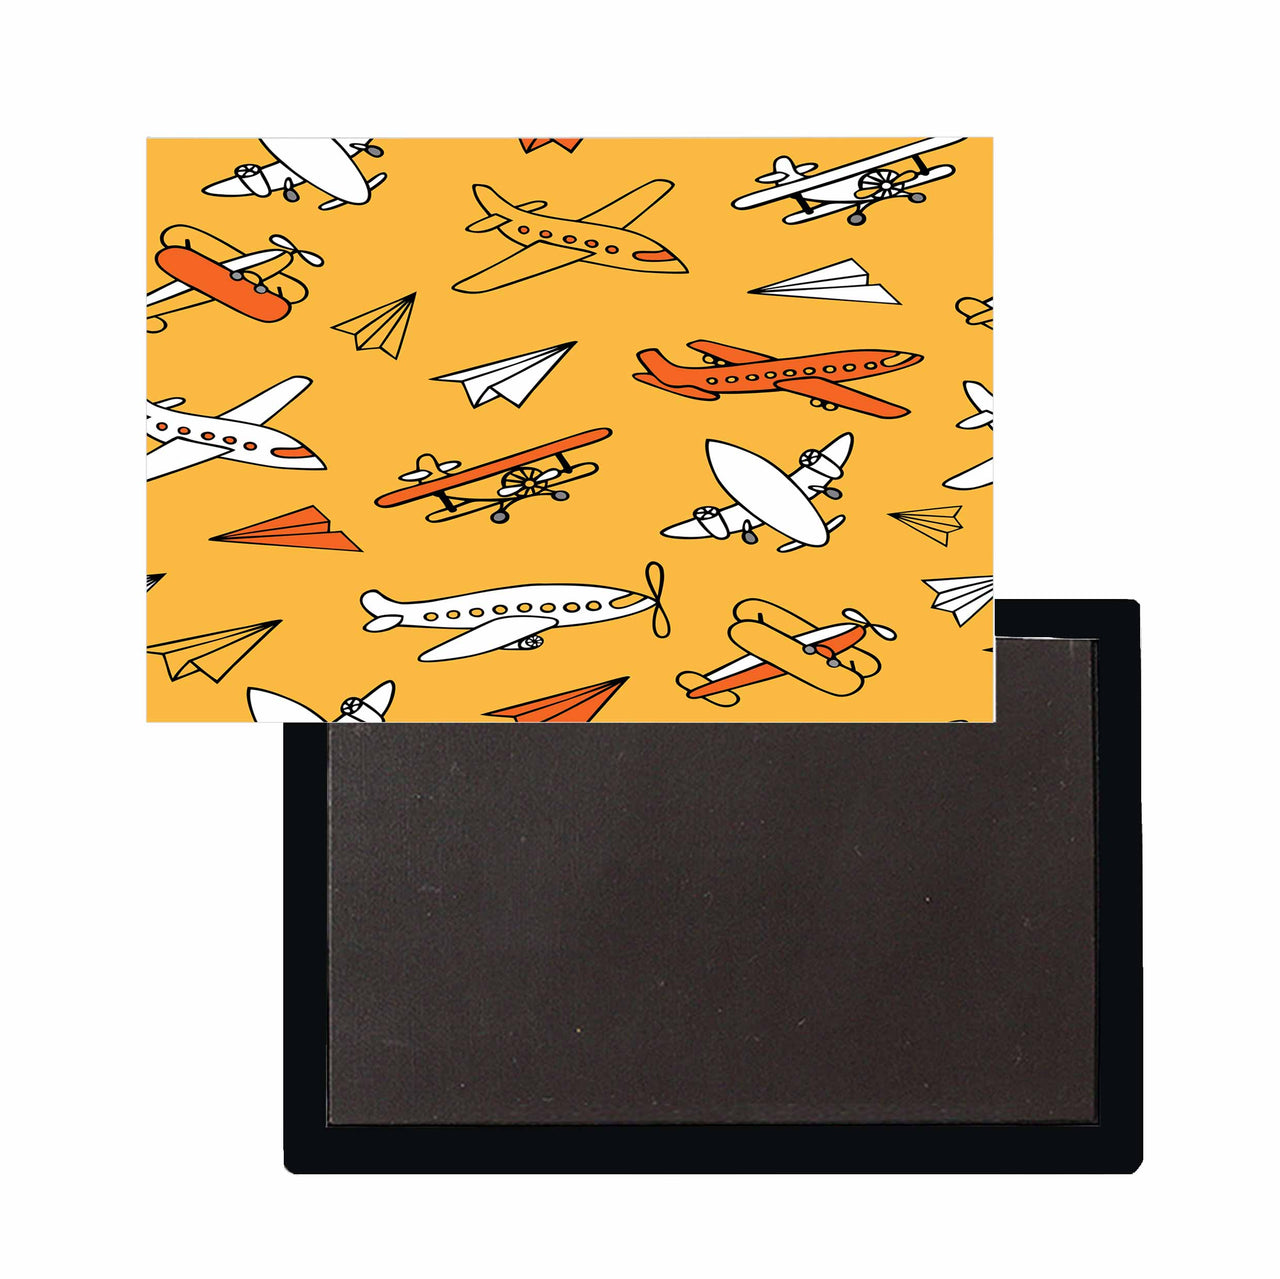 Super Drawings of Airplanes Designed Magnets